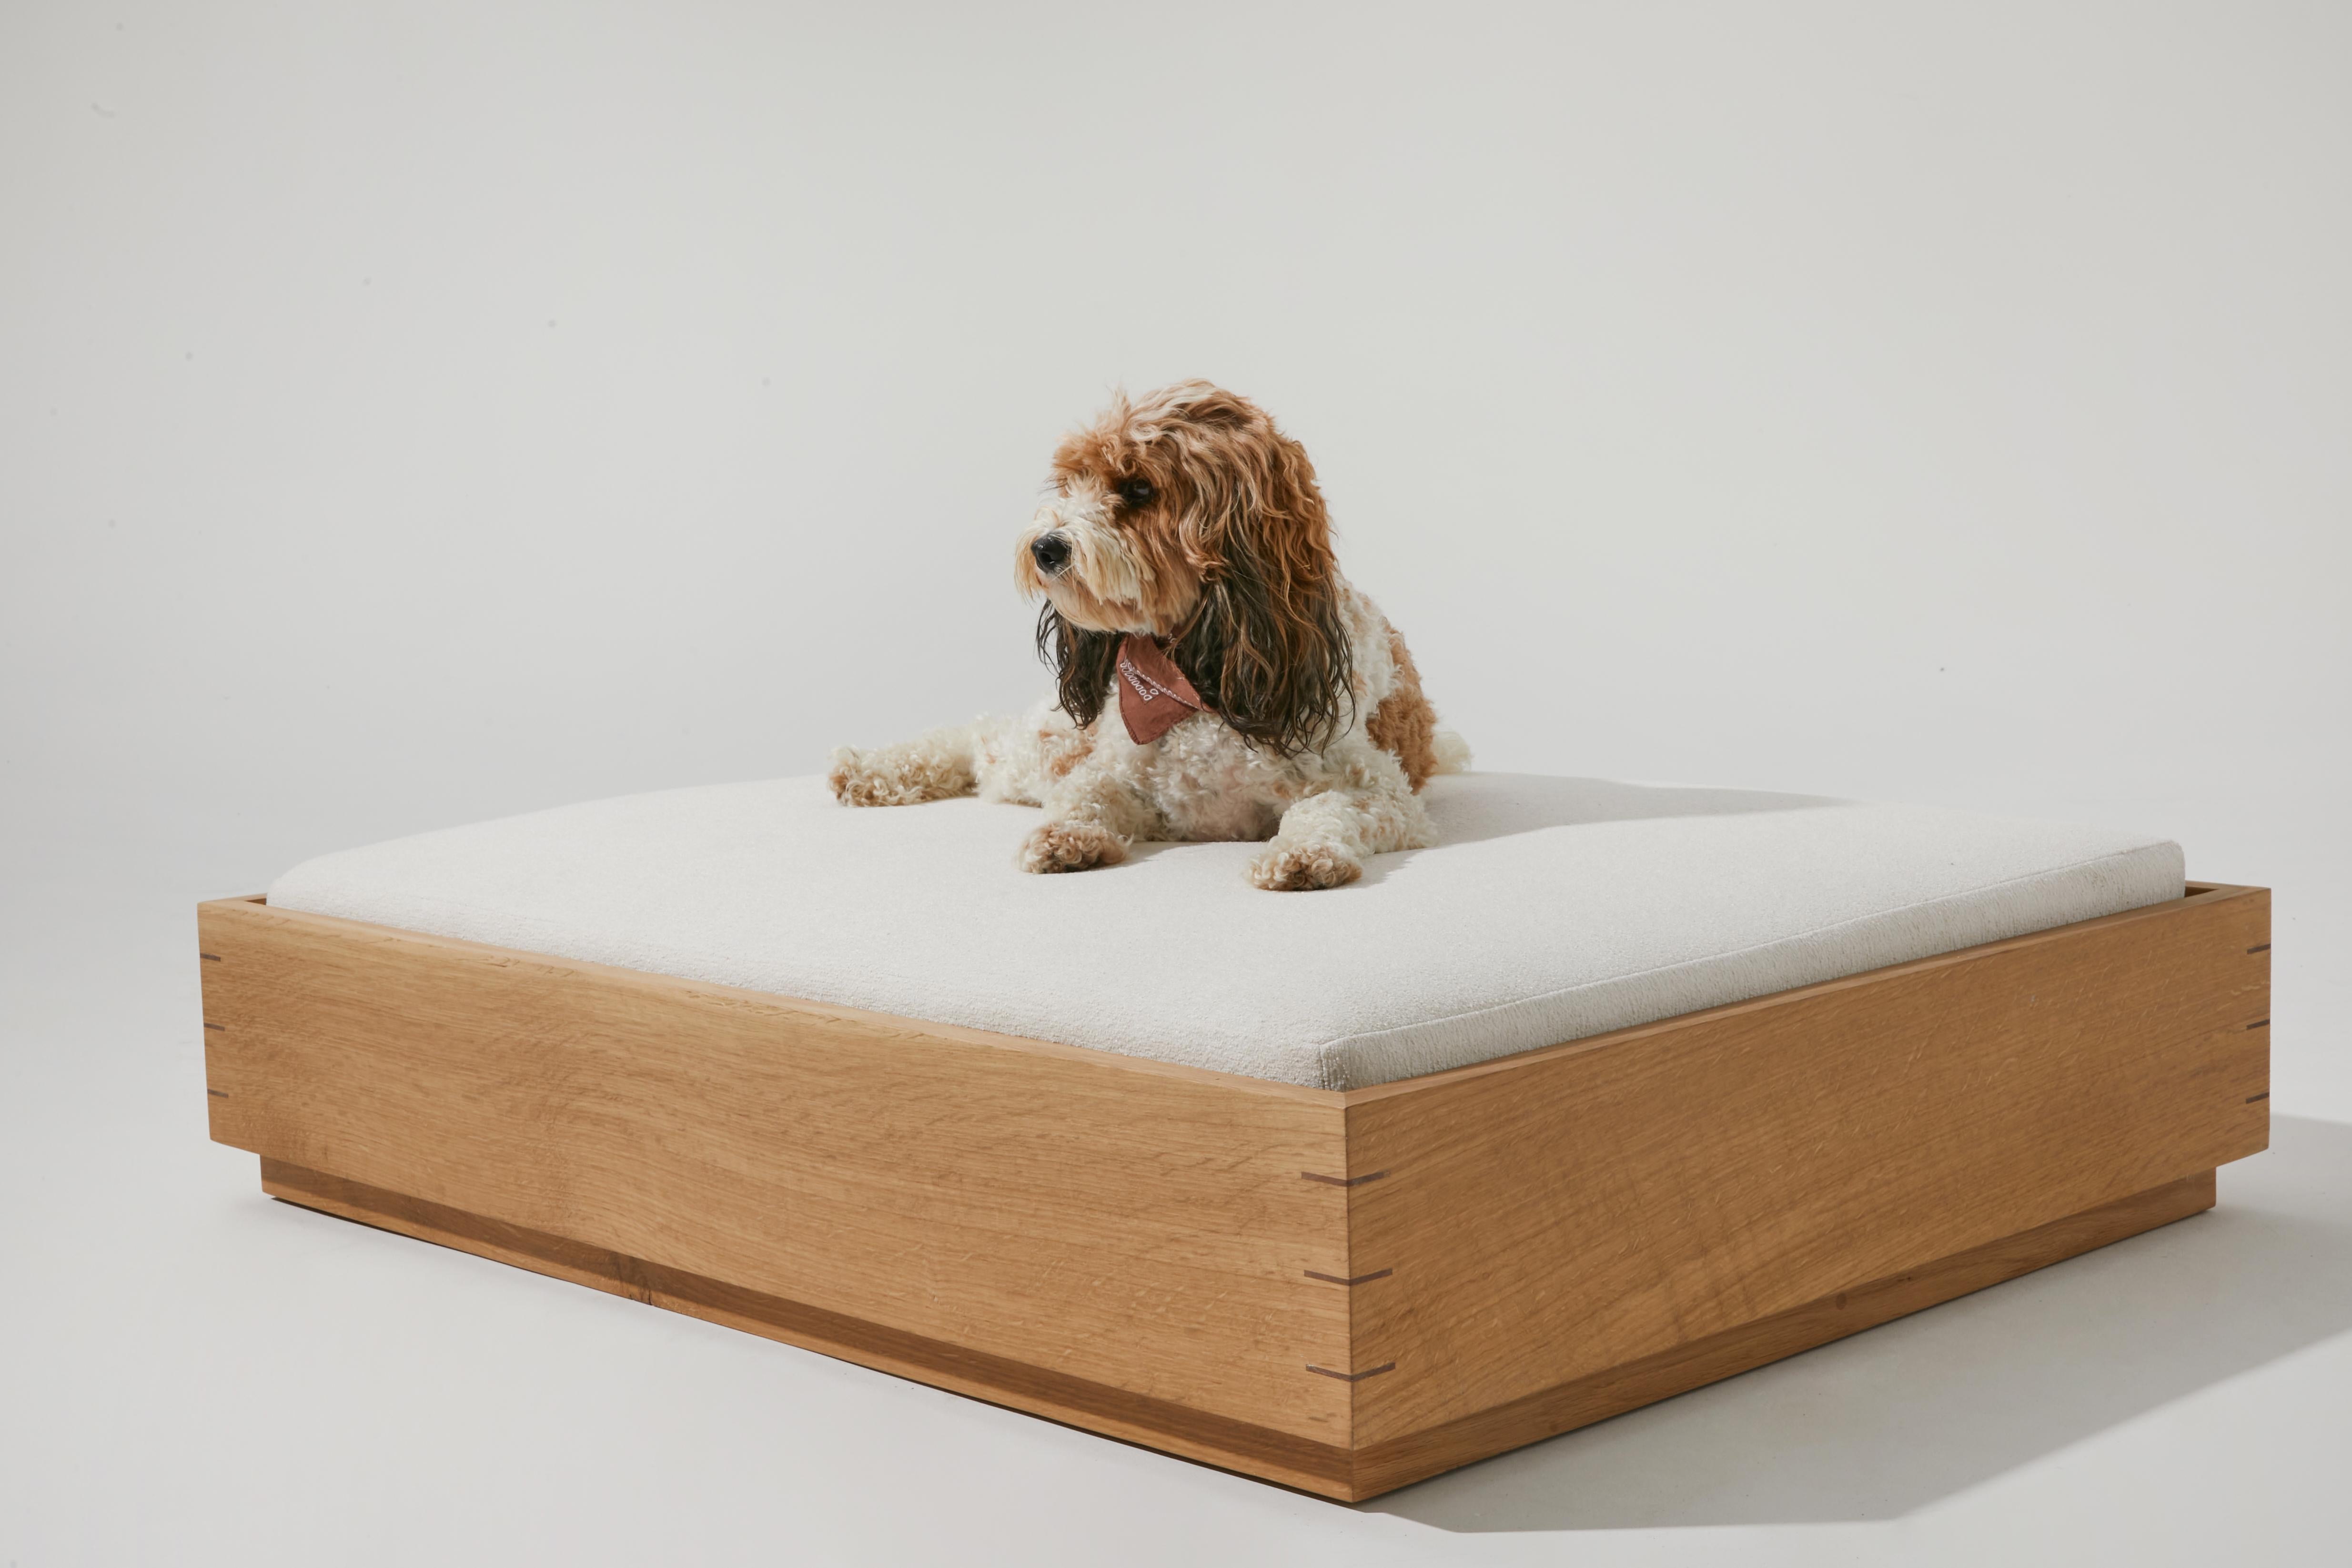 The Good Bed is named after and inspired by my two golden retrievers and their uncanny ability to sleep all day and all night. Made from quarter sawn white oak with mitered corners reinforced with walnut splines. It comes with a removable washable